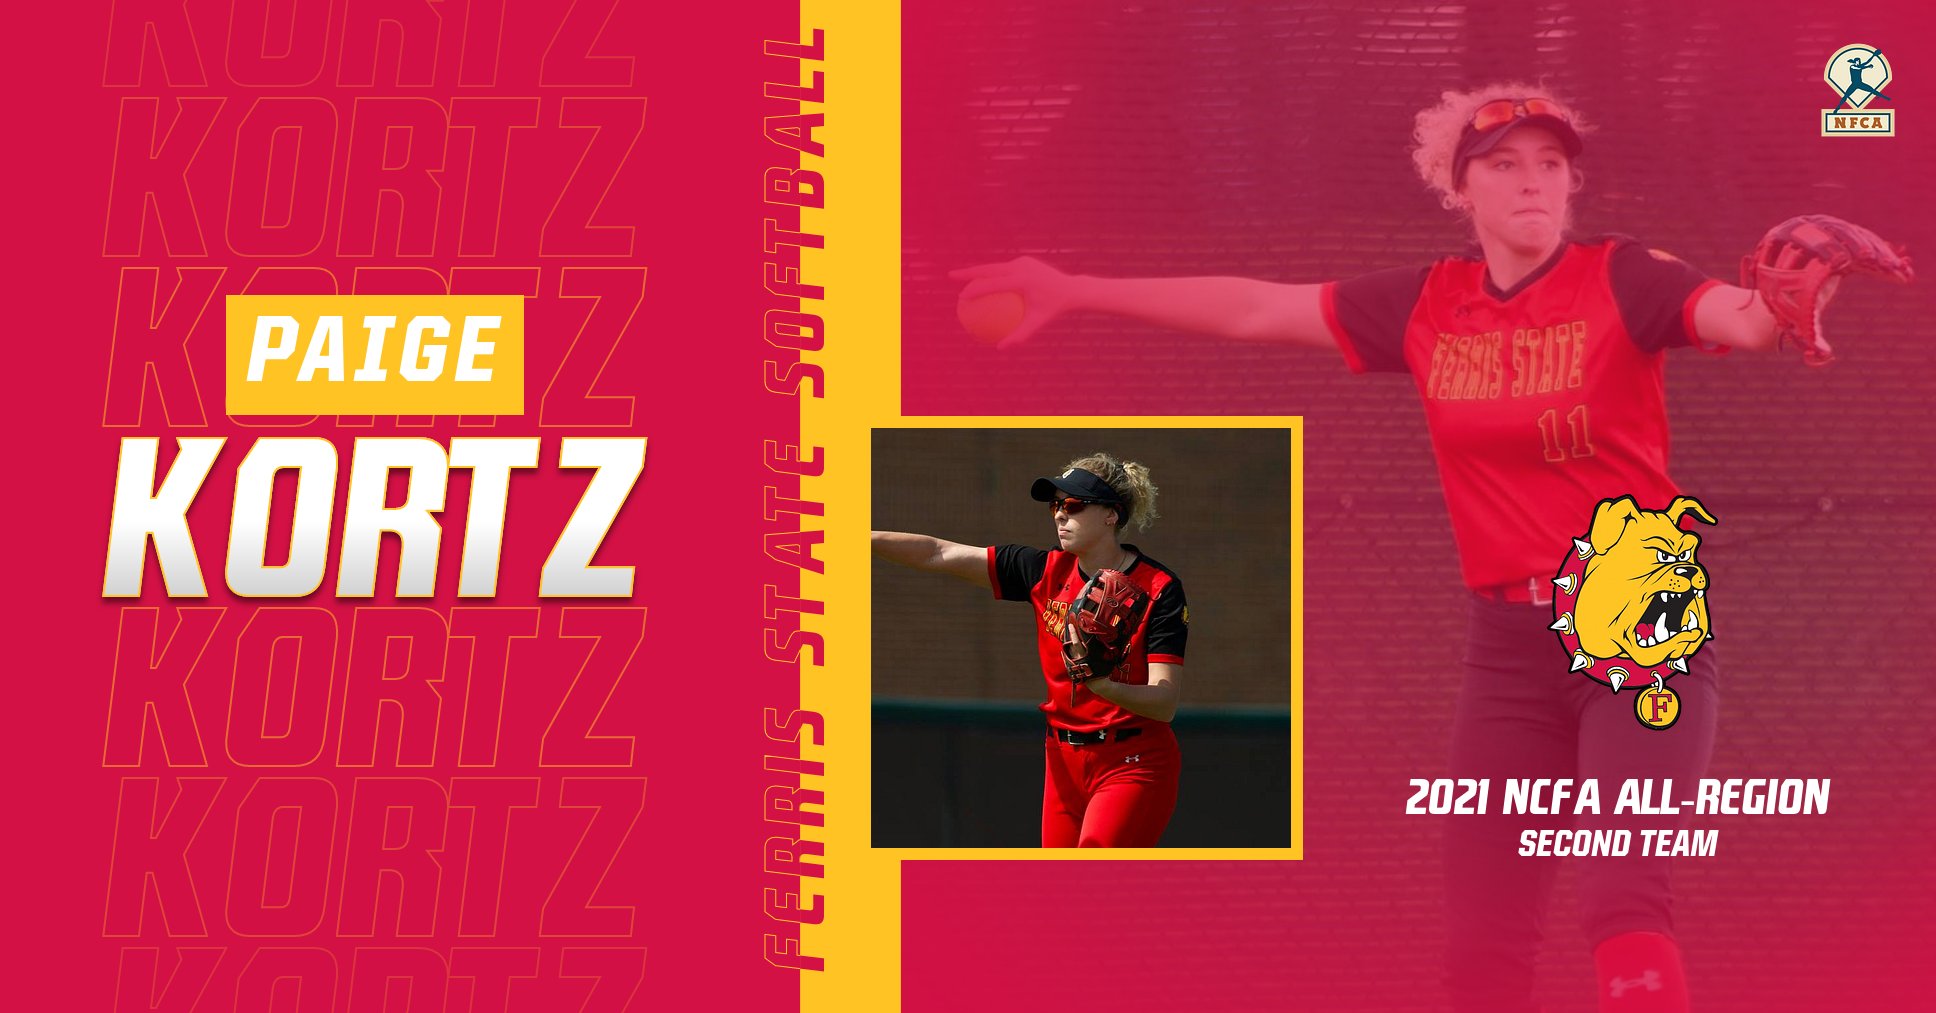 Ferris State's Paige Kortz Tabbed To NFCA Division II All-Region Squad